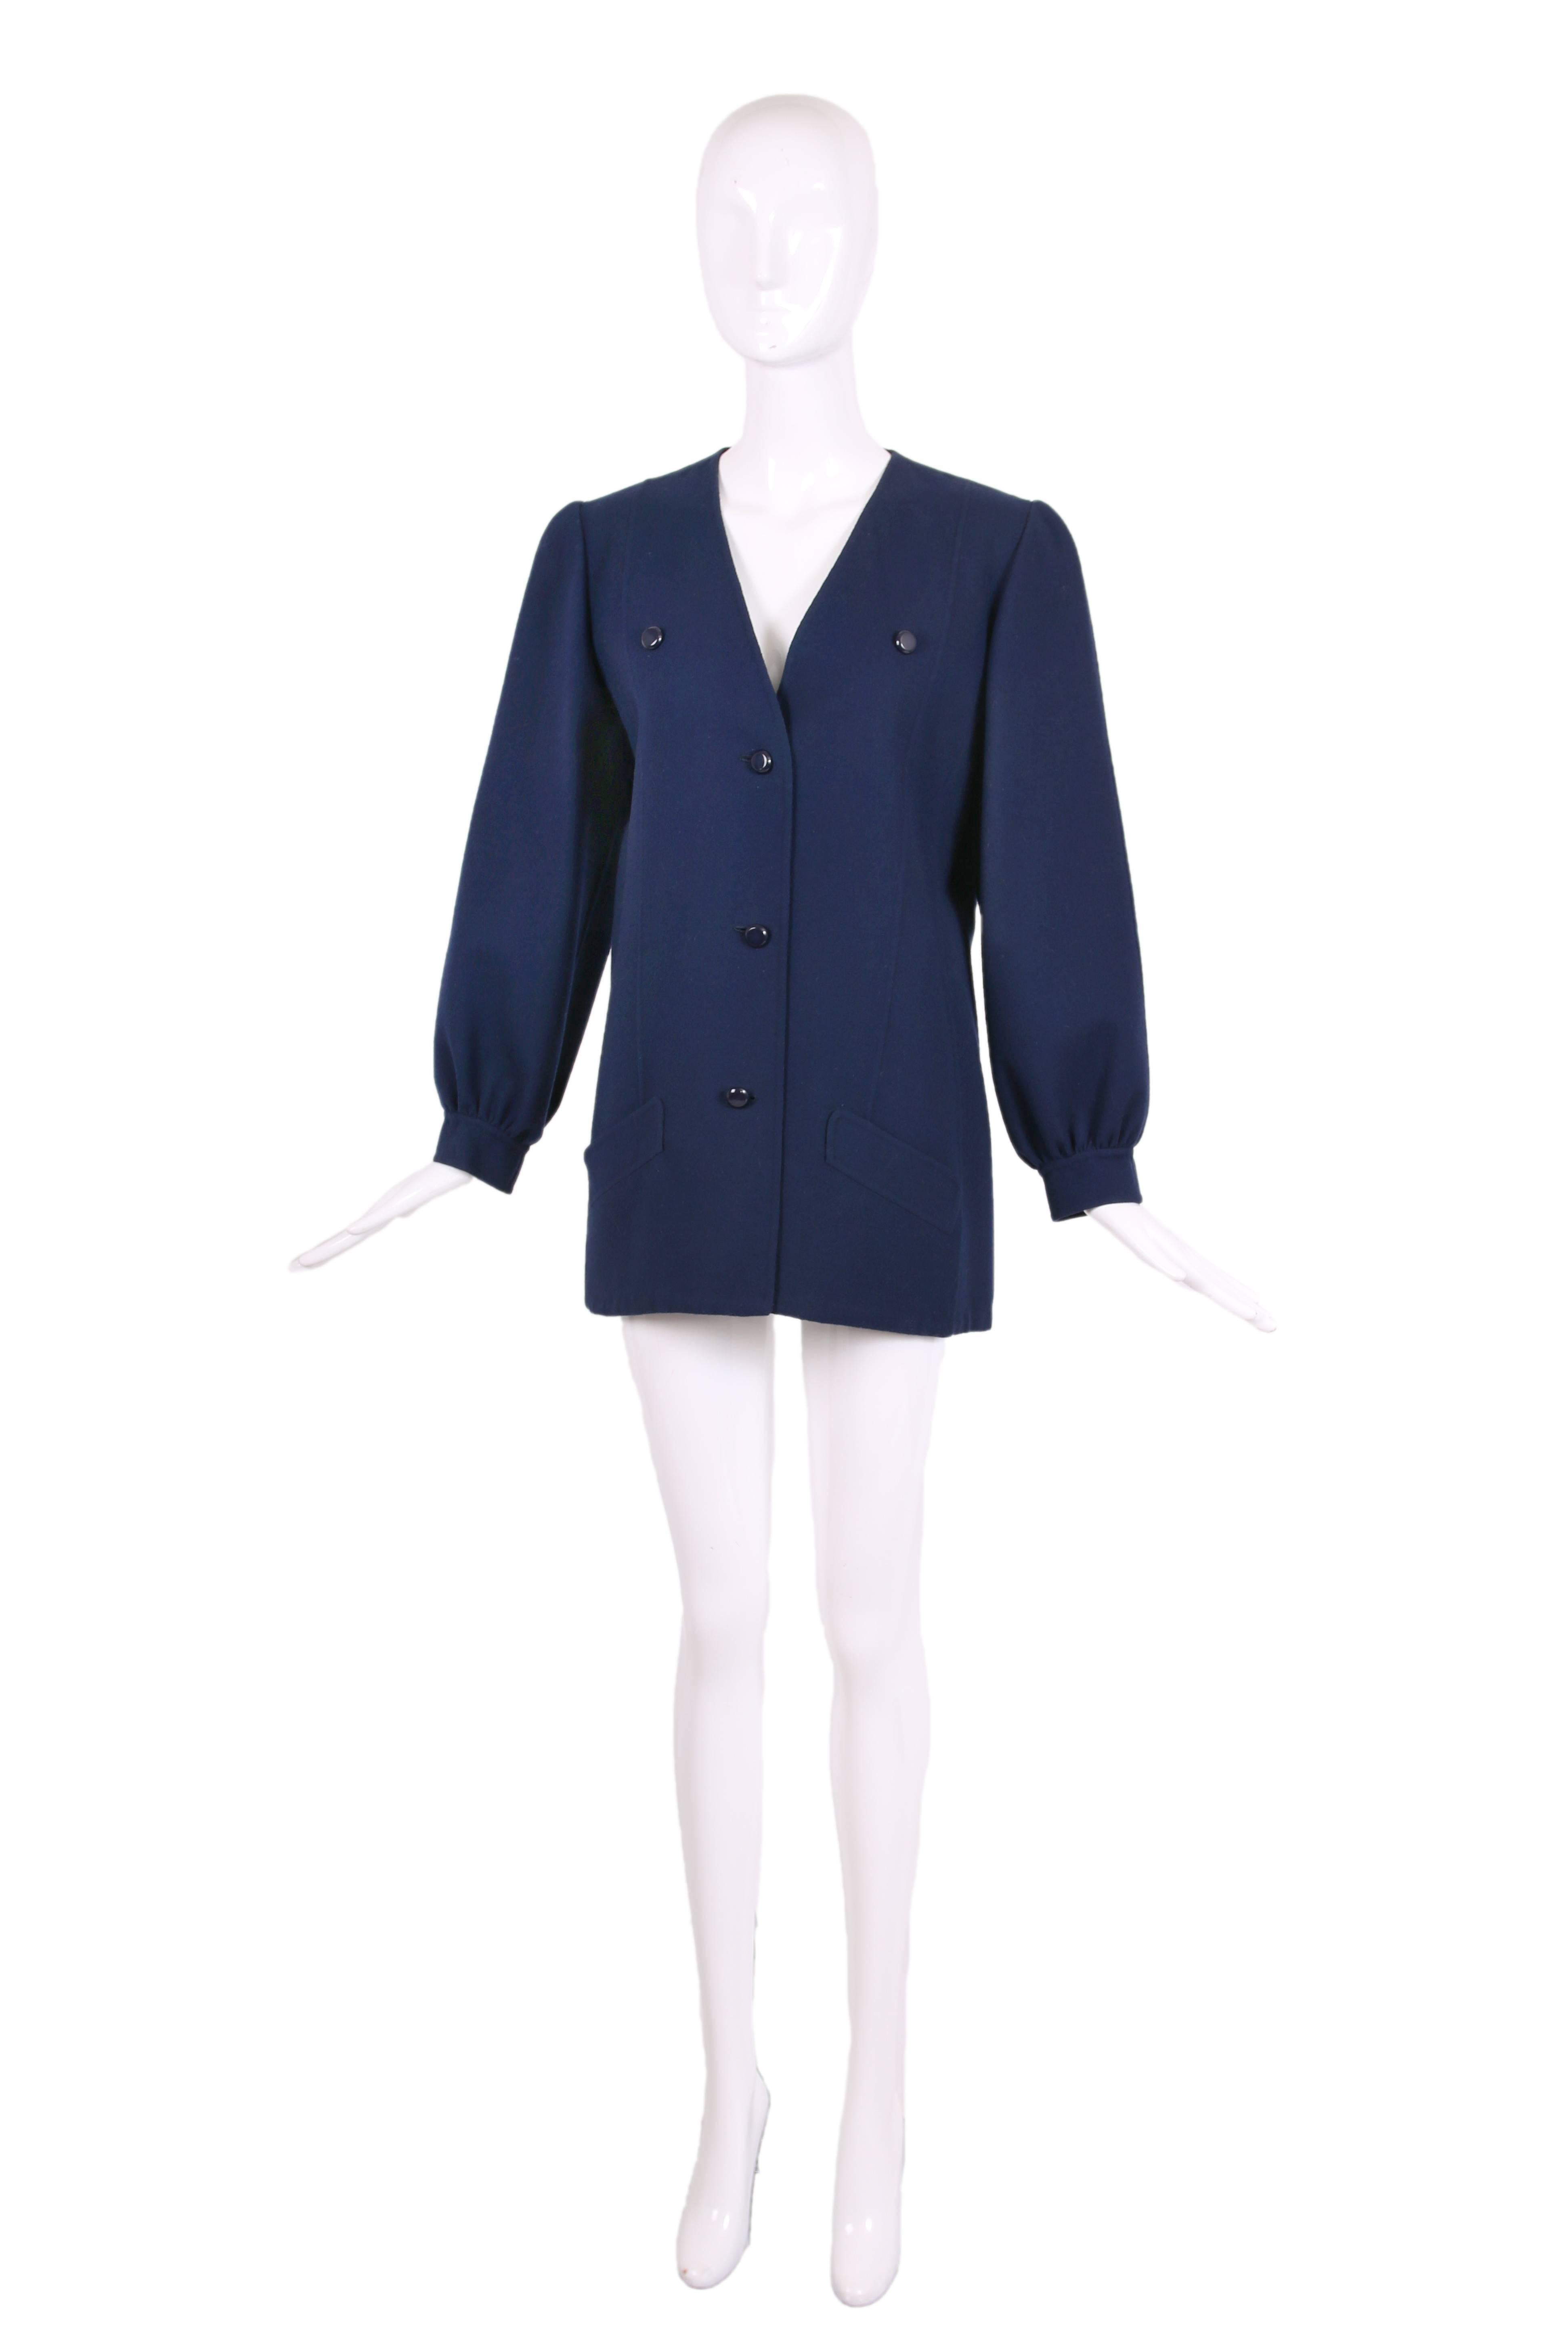 1970's Andre Laug navy melton wool v-neck jacket with shiny buttons down center front and two pockets the bottom. In excellent condition. No size tag - please consult measurements.